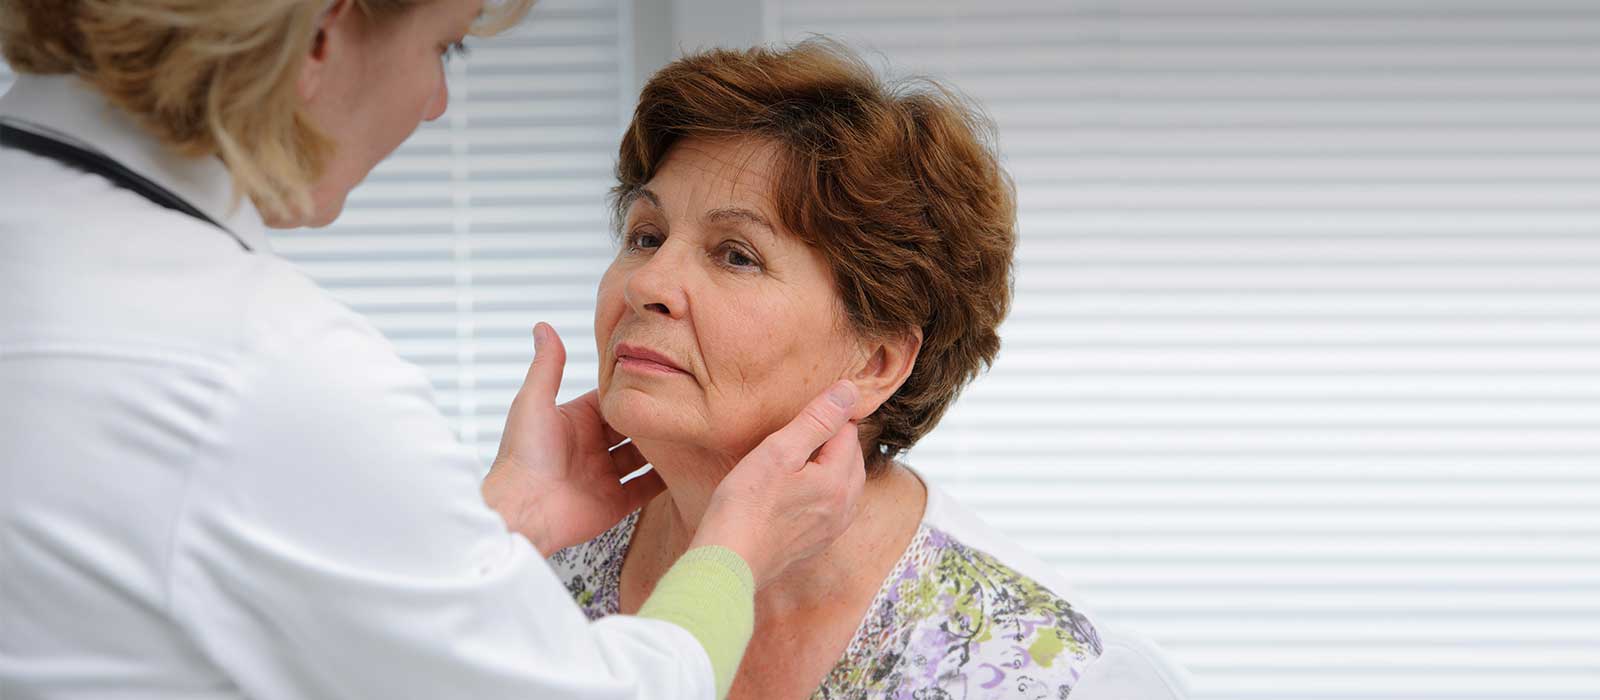 doctor diagnosing woman with head and neck condition